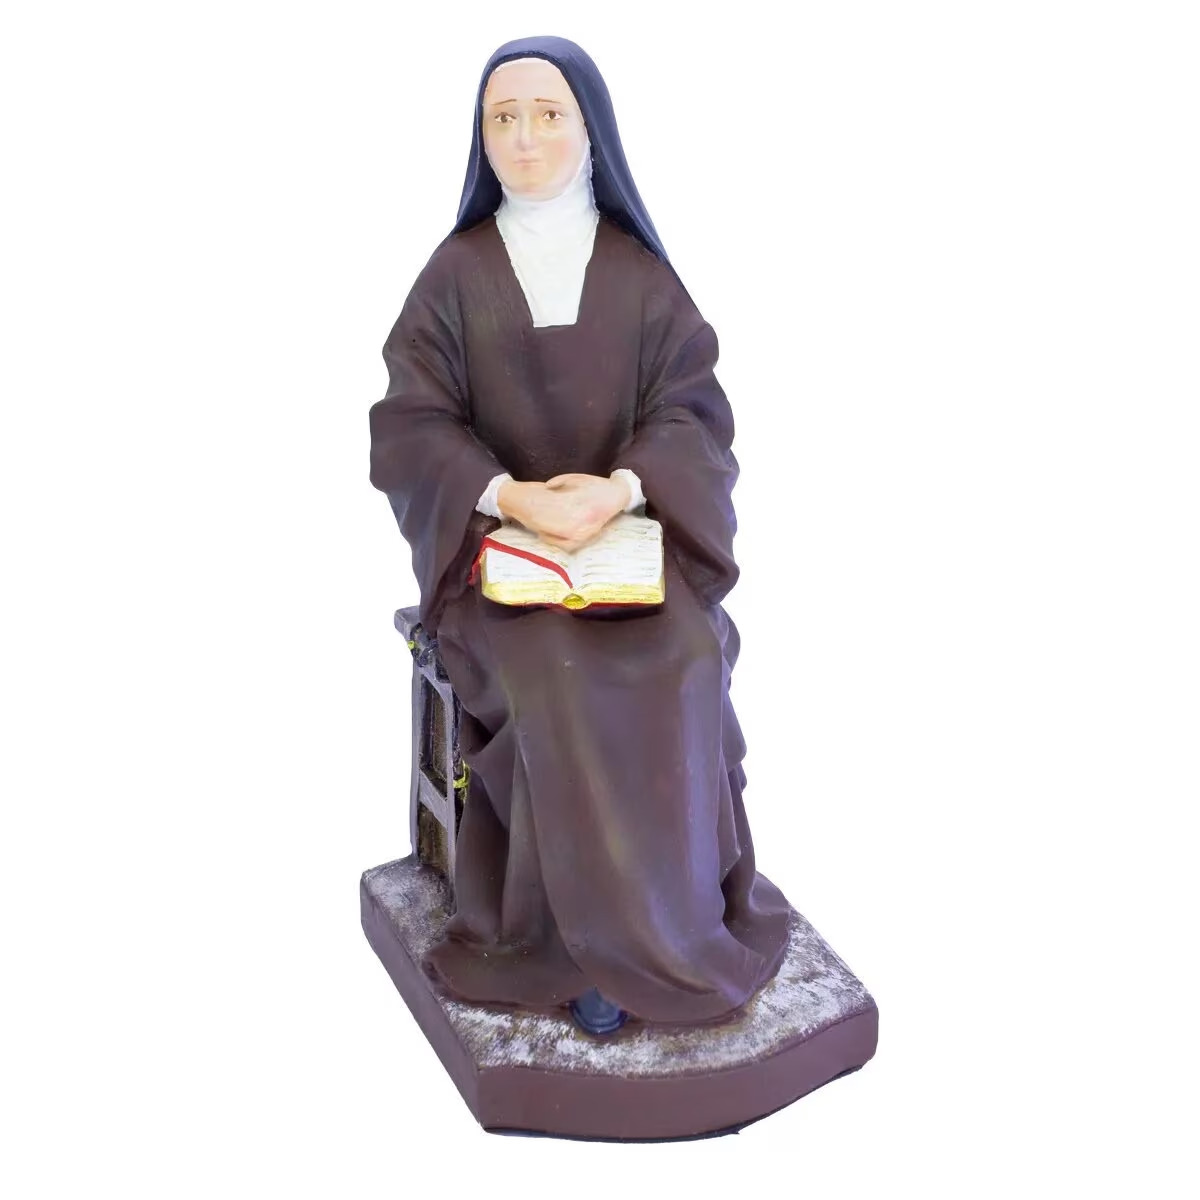 Saint Therese of Lisieux Seated - Statue Teresa of the Child Jesus in Polychrome